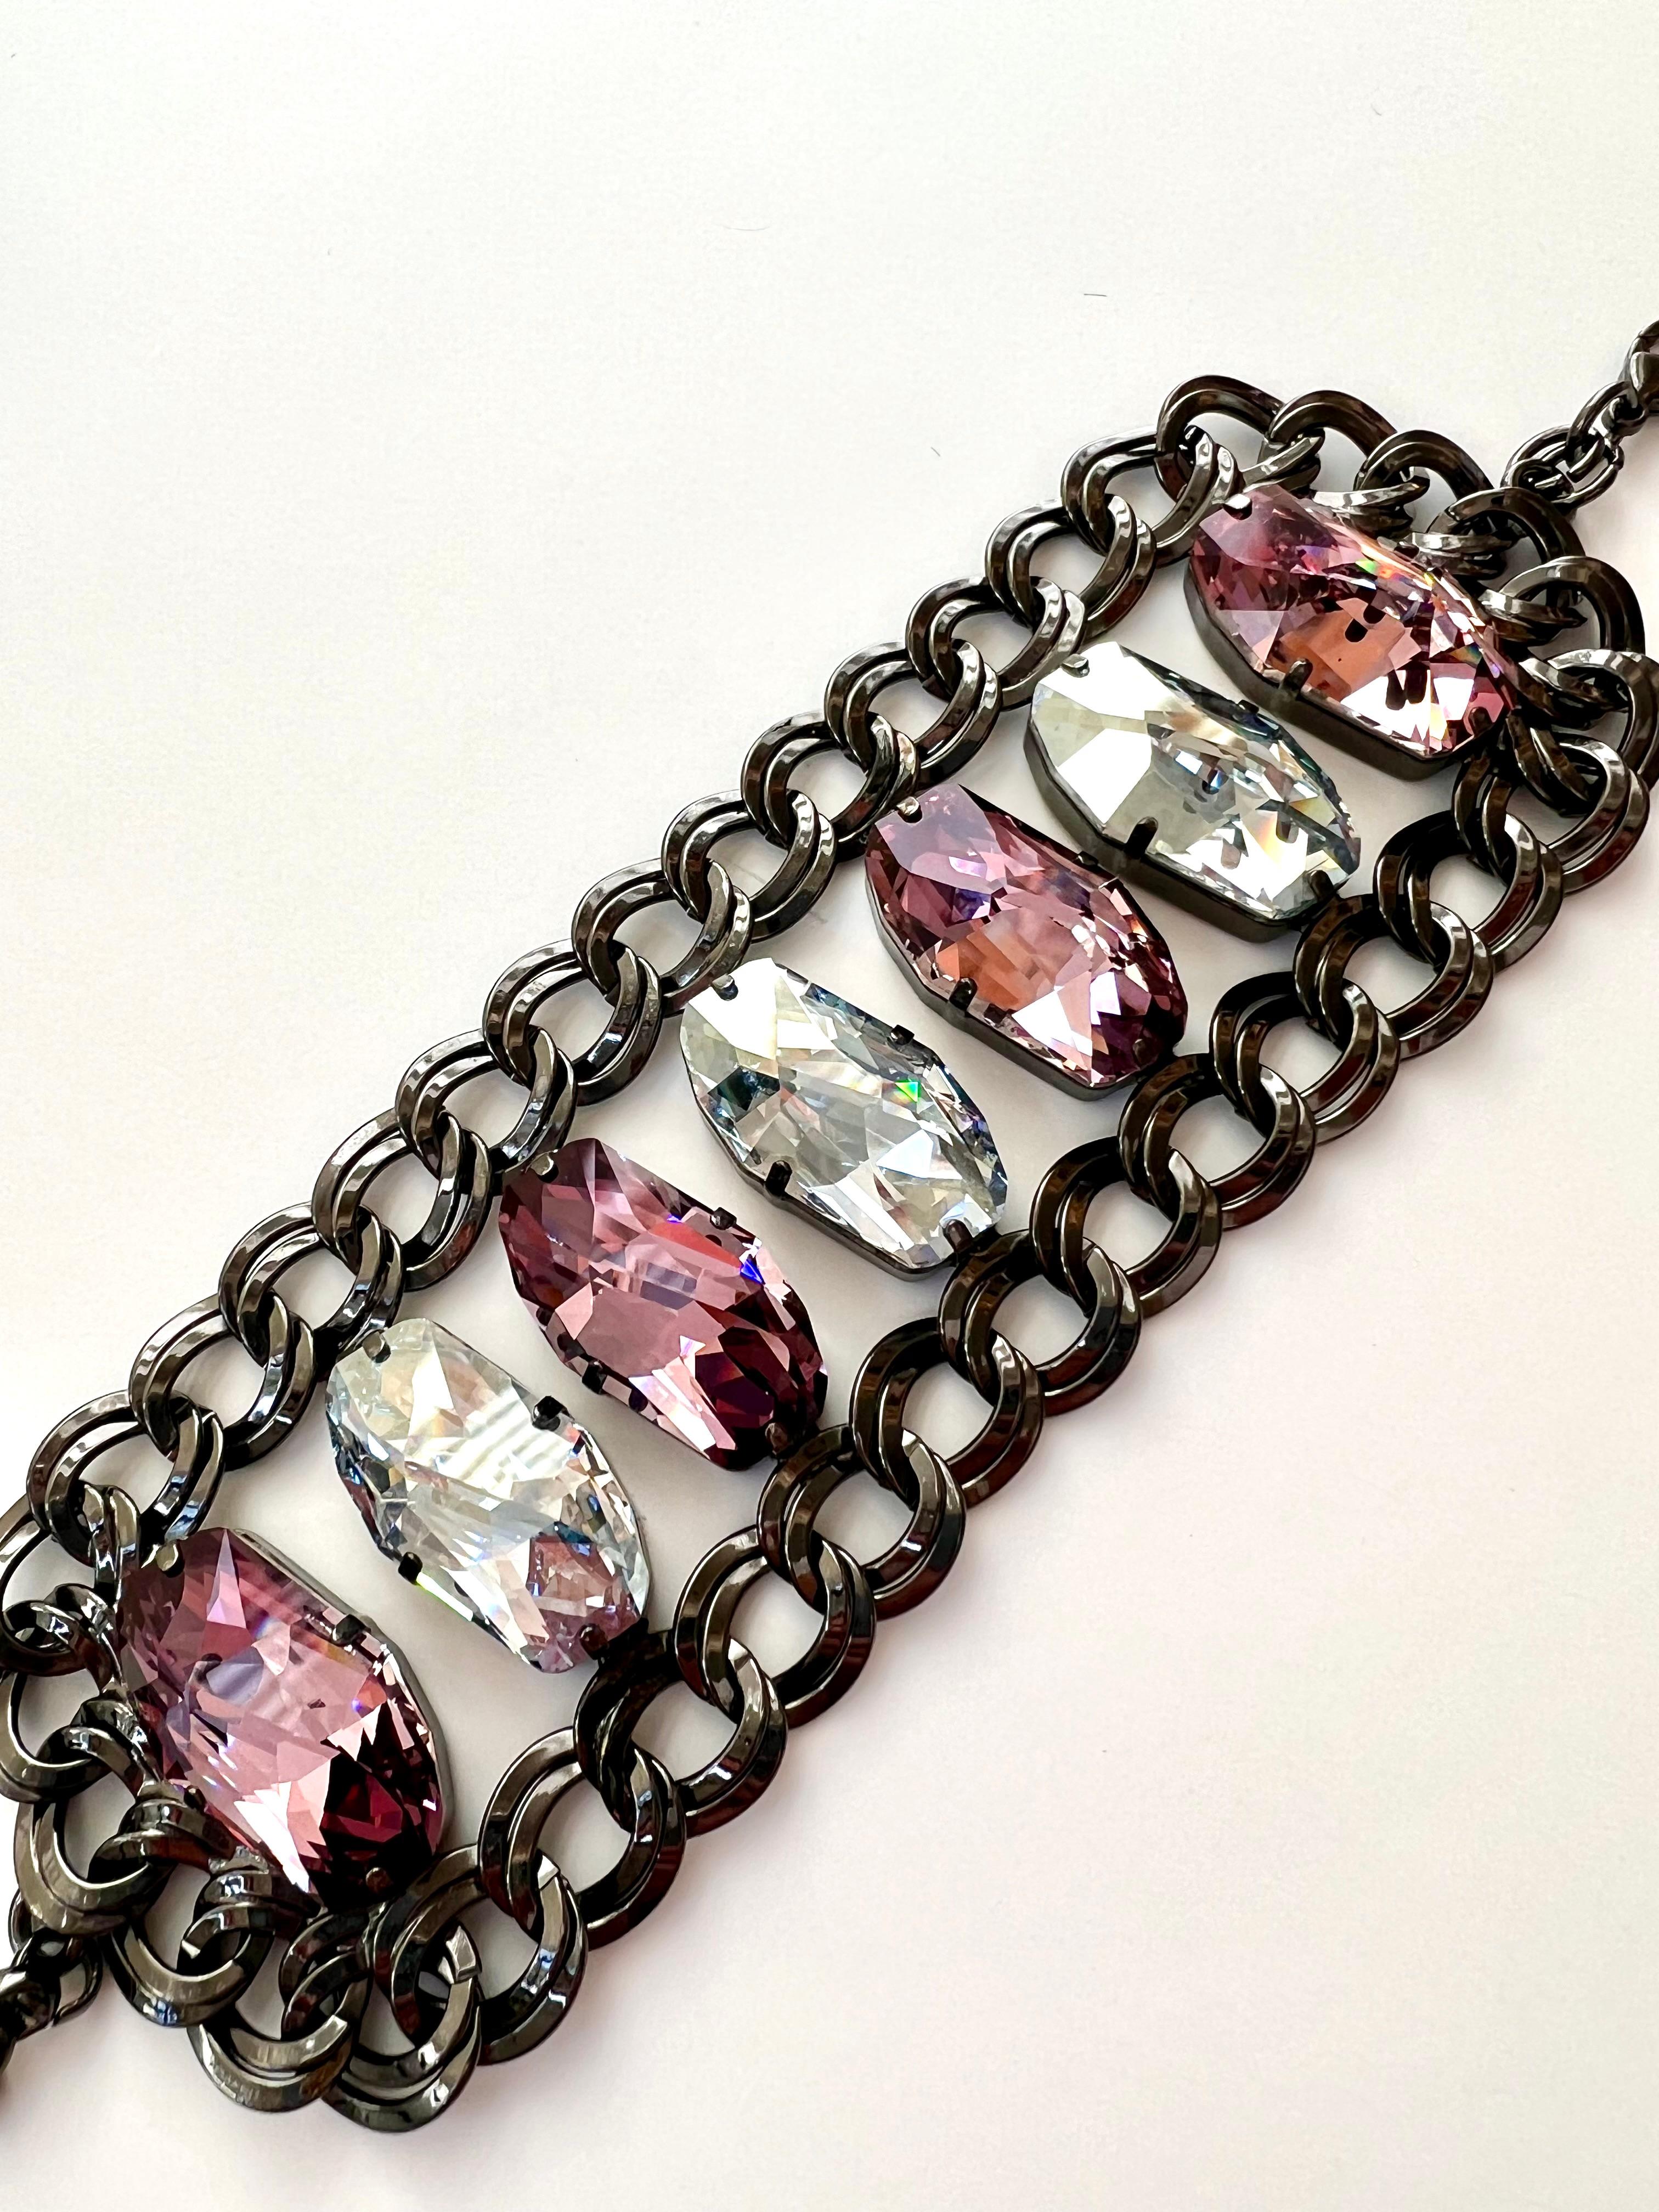 Beautiful Pink and clear Swarowsky statement bracelet, showcasing a mix of modern cut large crystals that emanates dazzling light with each movement. Made in Florence by local master artisans which have a long heritage of metalworking techniques.